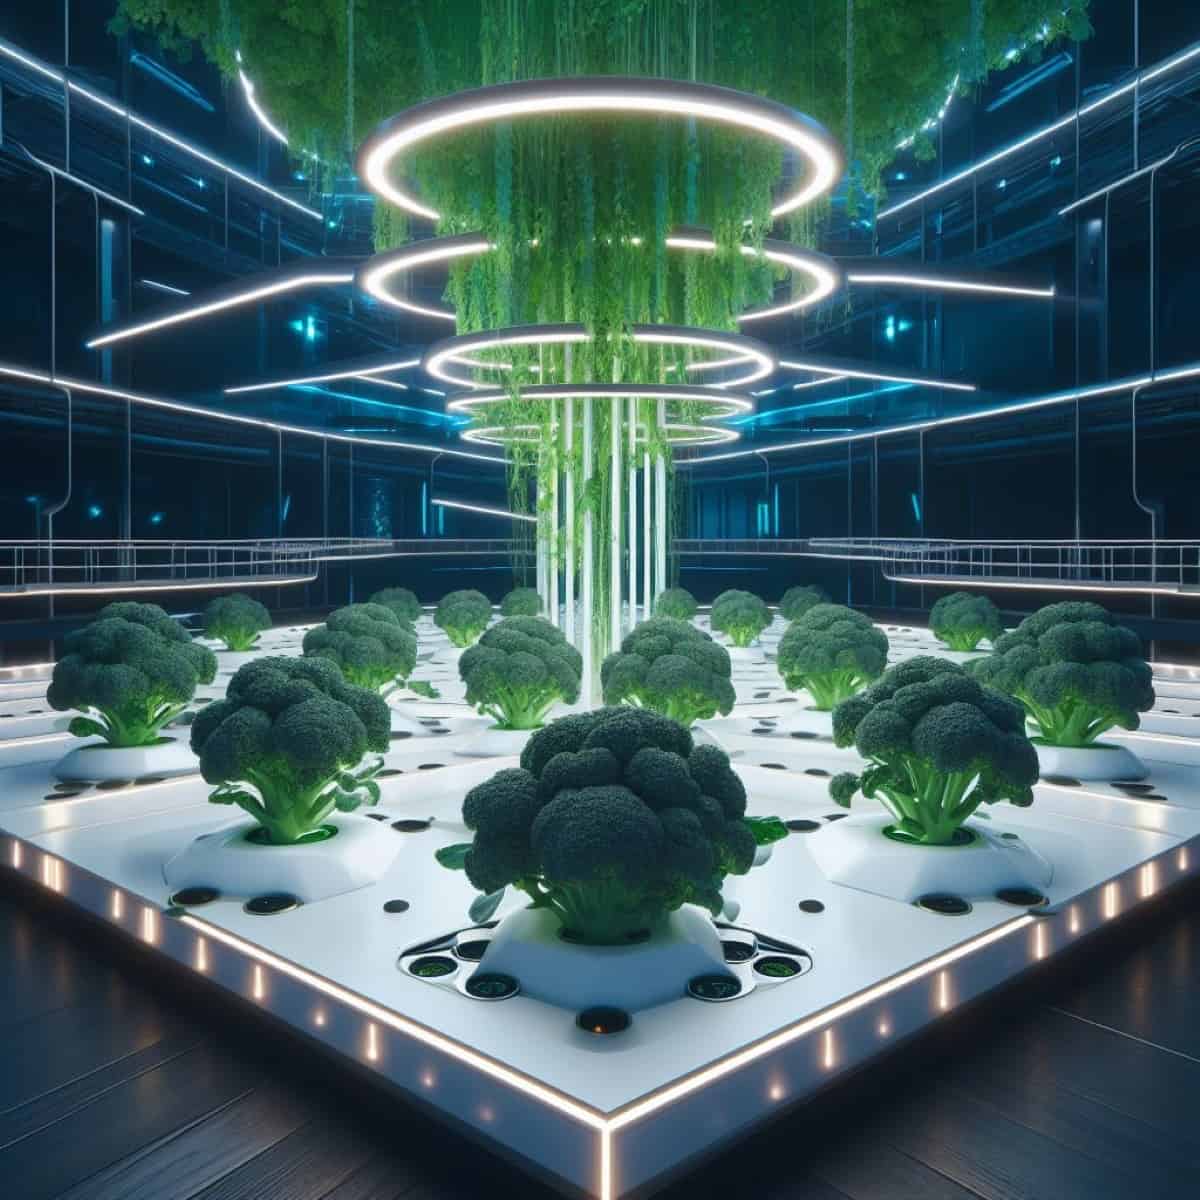 How to Grow Broccoli in a Hydroponic System